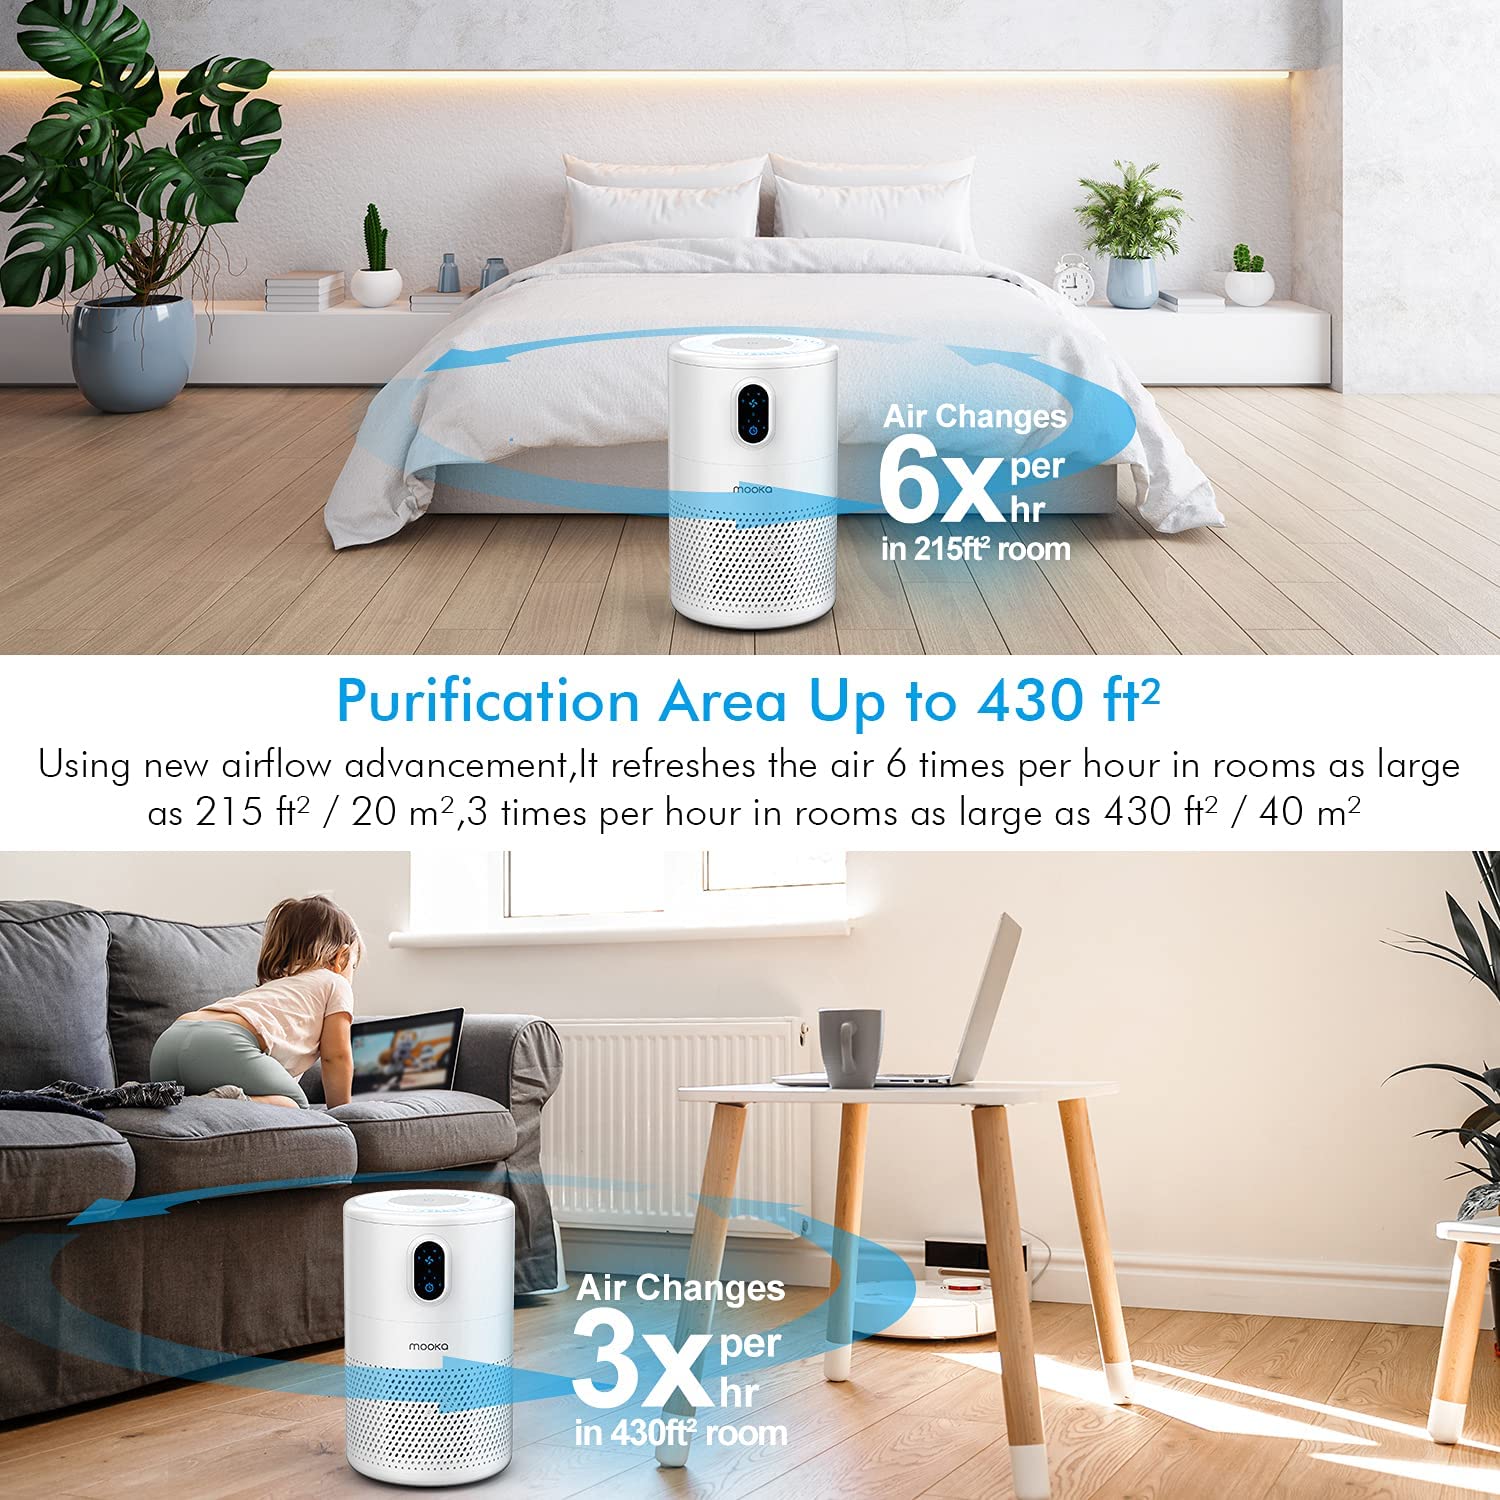 Levoit Air Purifiers for Bedroom Home, HEPA Freshener Filter Small Room for Smoke, Allergies, Pet Dander, Pollen, Odor, Dust Remover, Ozone Free